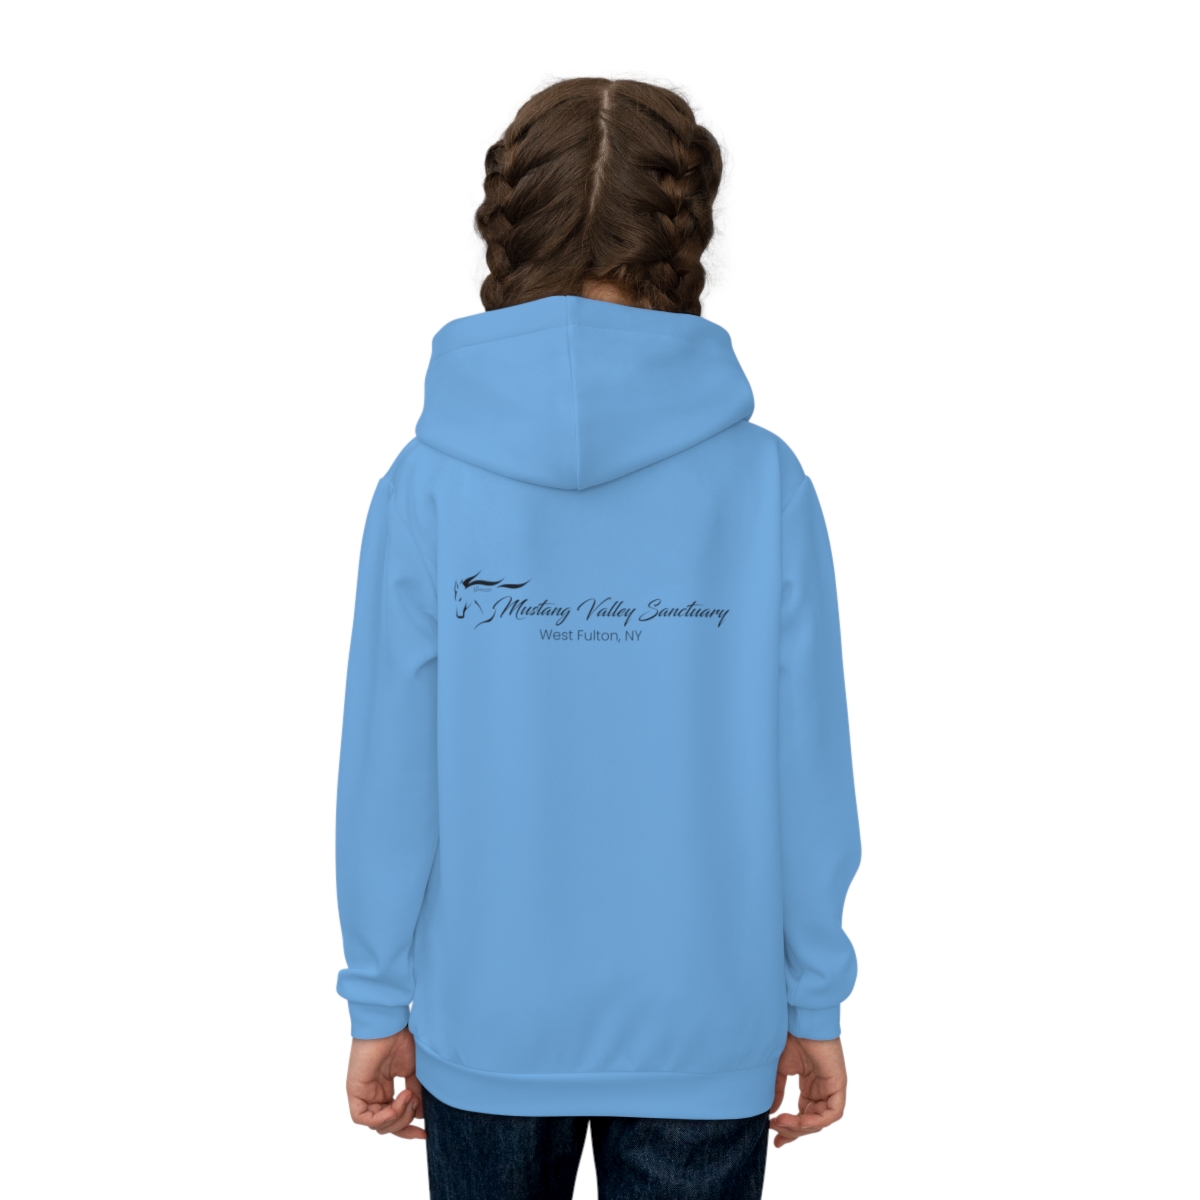 Blue Children's Hoodie product thumbnail image